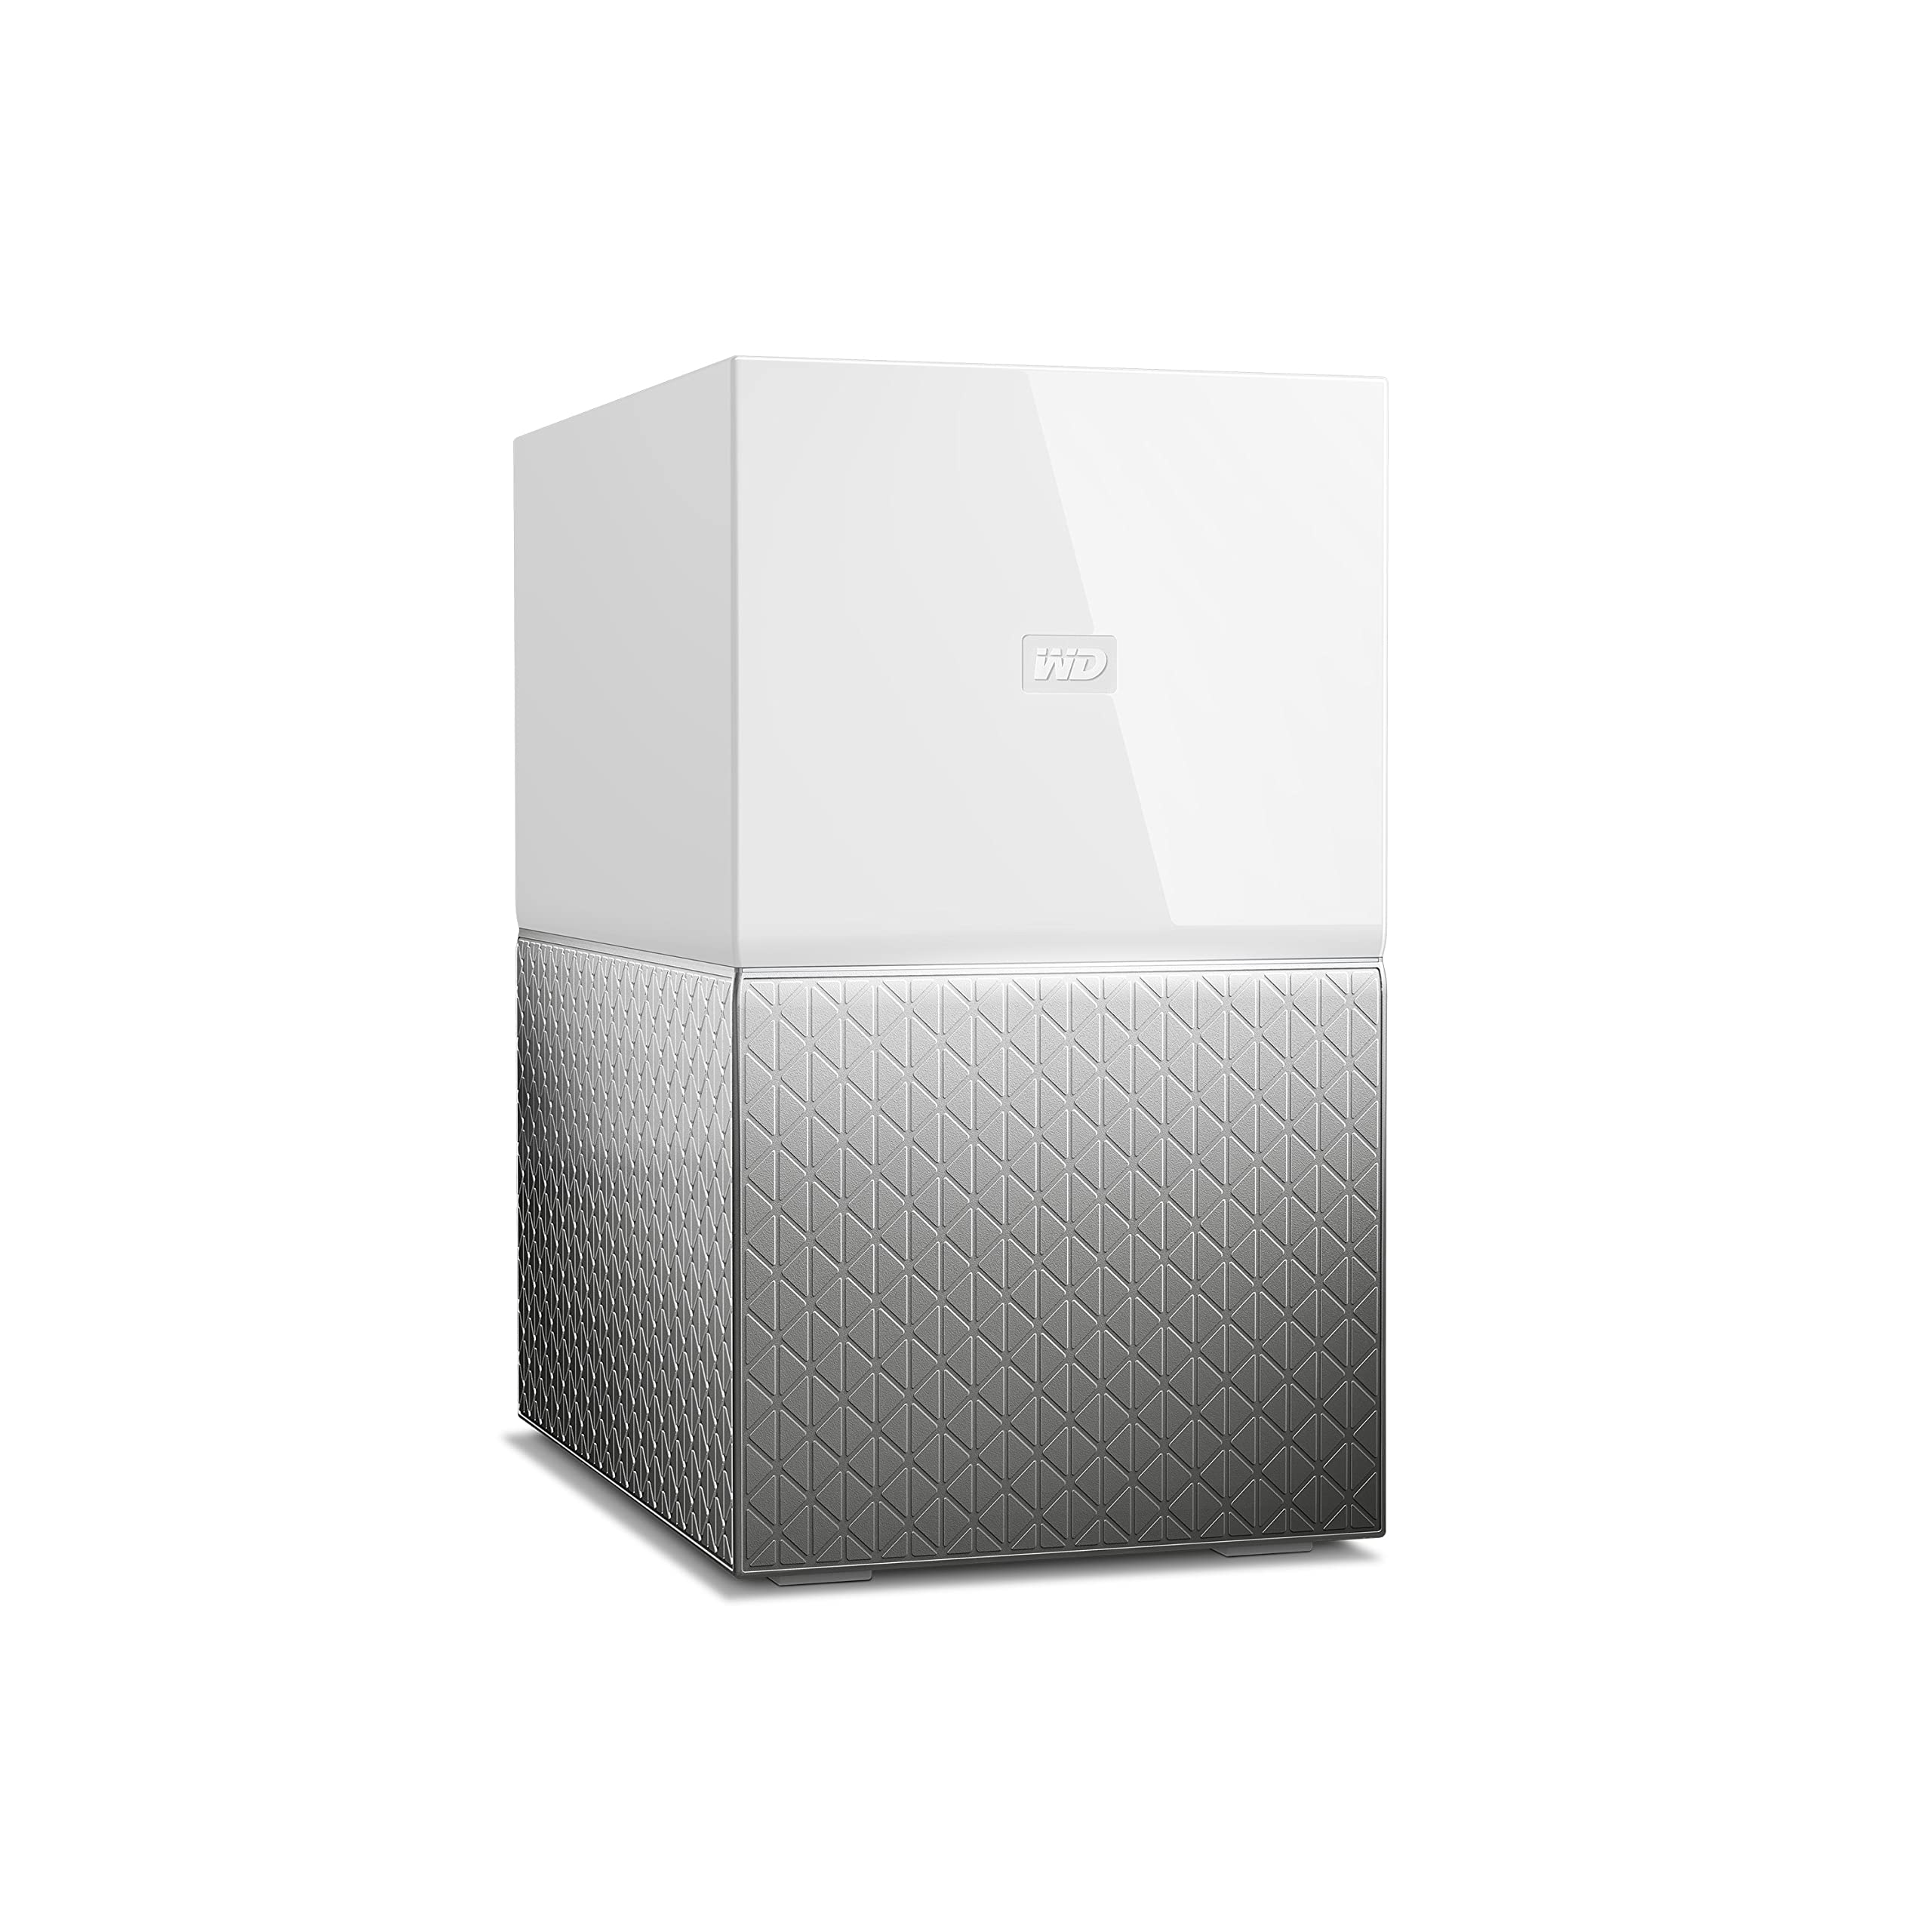 WD 20TB My Cloud Home Duo Personal Cloud Storage - WDBMUT0200JWT-NESN